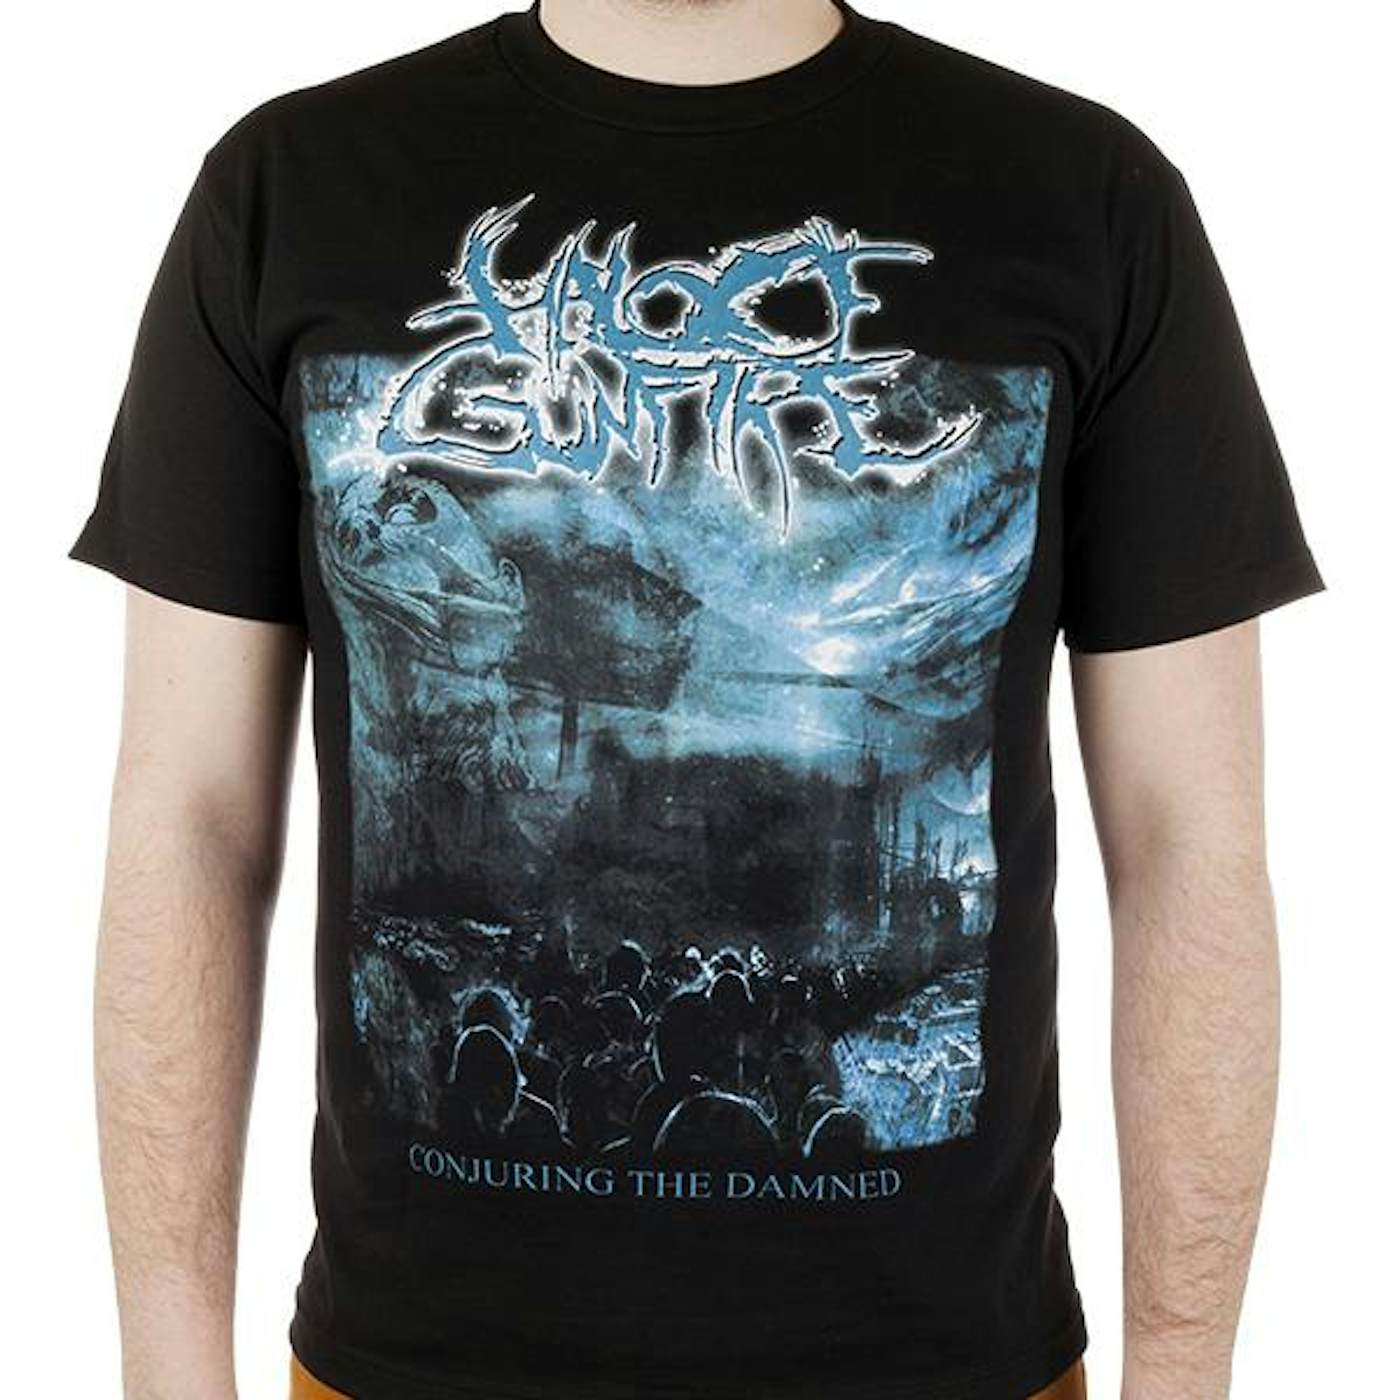 Halo Of Gunfire "Conjuring The Damned" T-Shirt